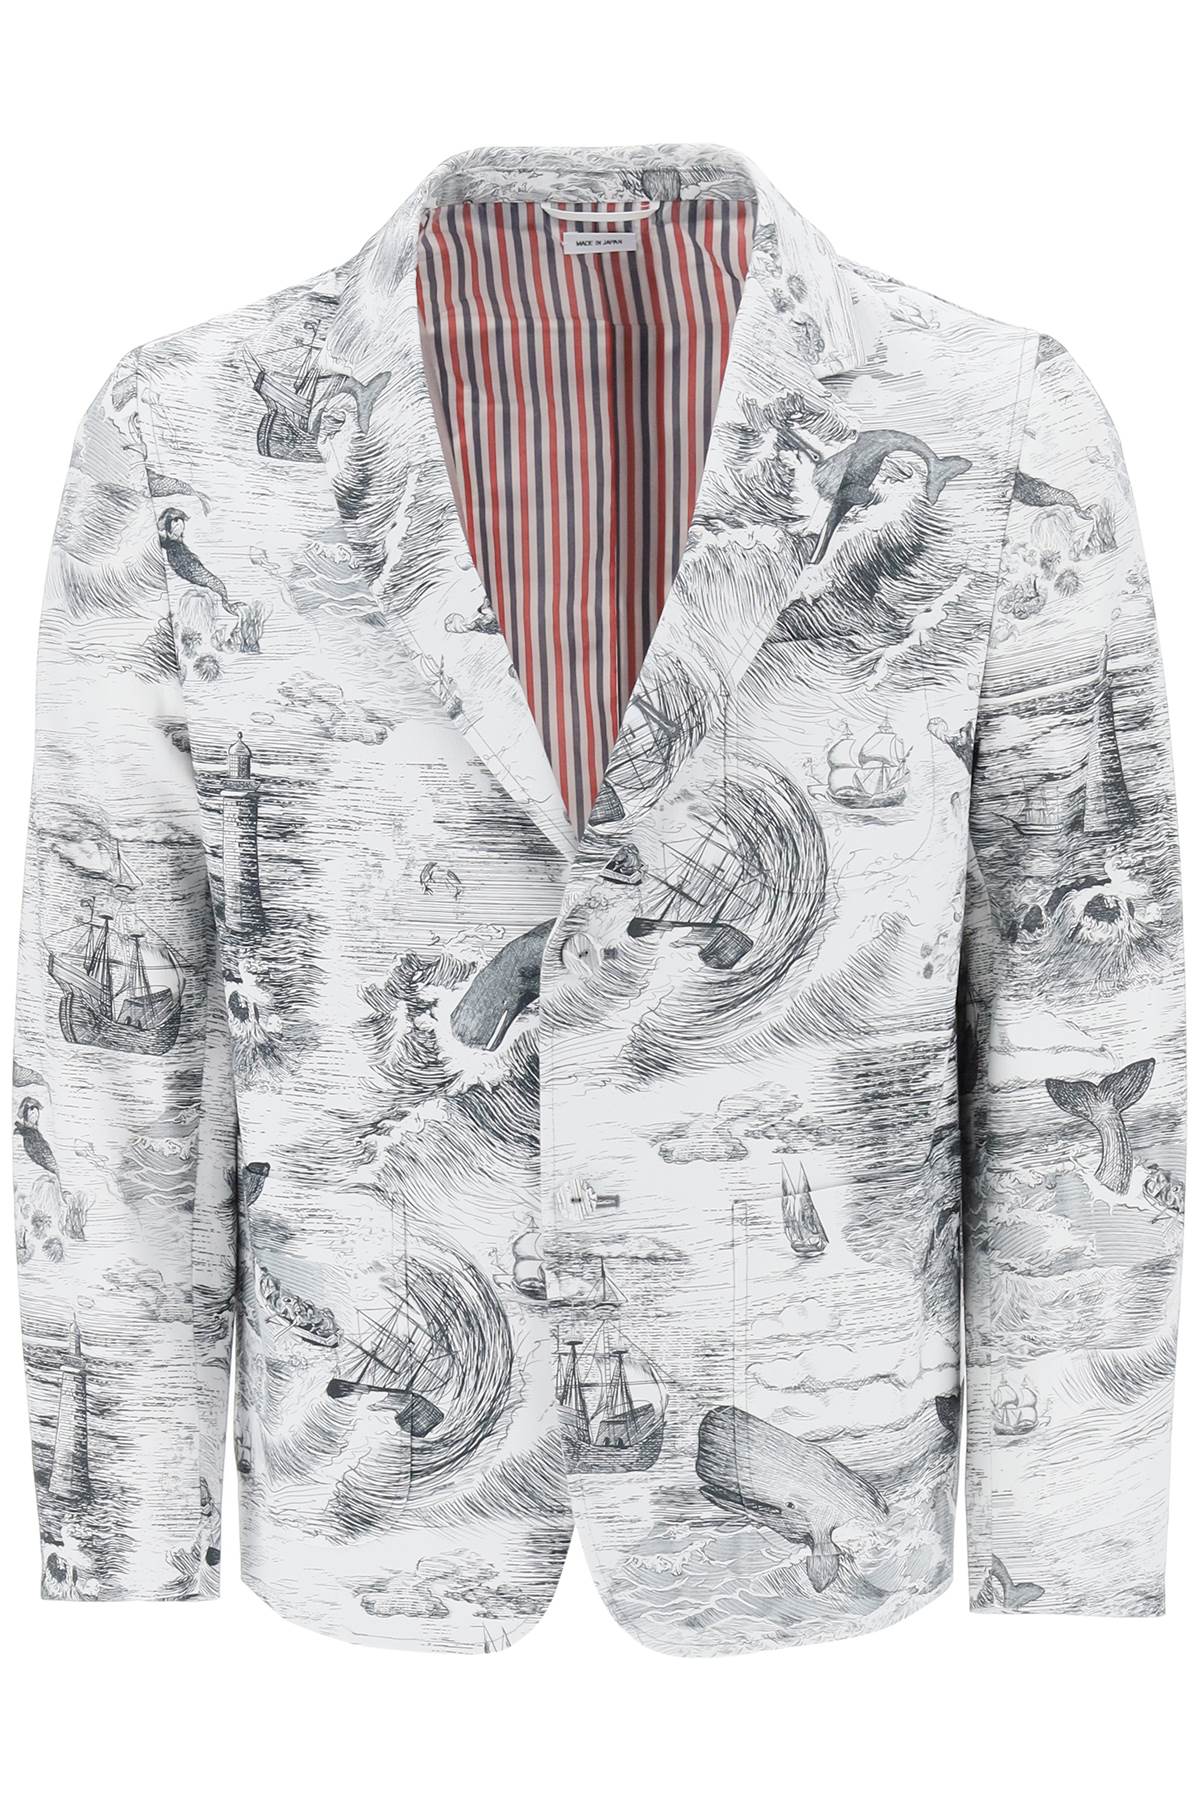 THOM BROWNE DECONSTRUCTED SINGLE BREASTED JACKET WITH NAUTICAL TOILE MOTIF